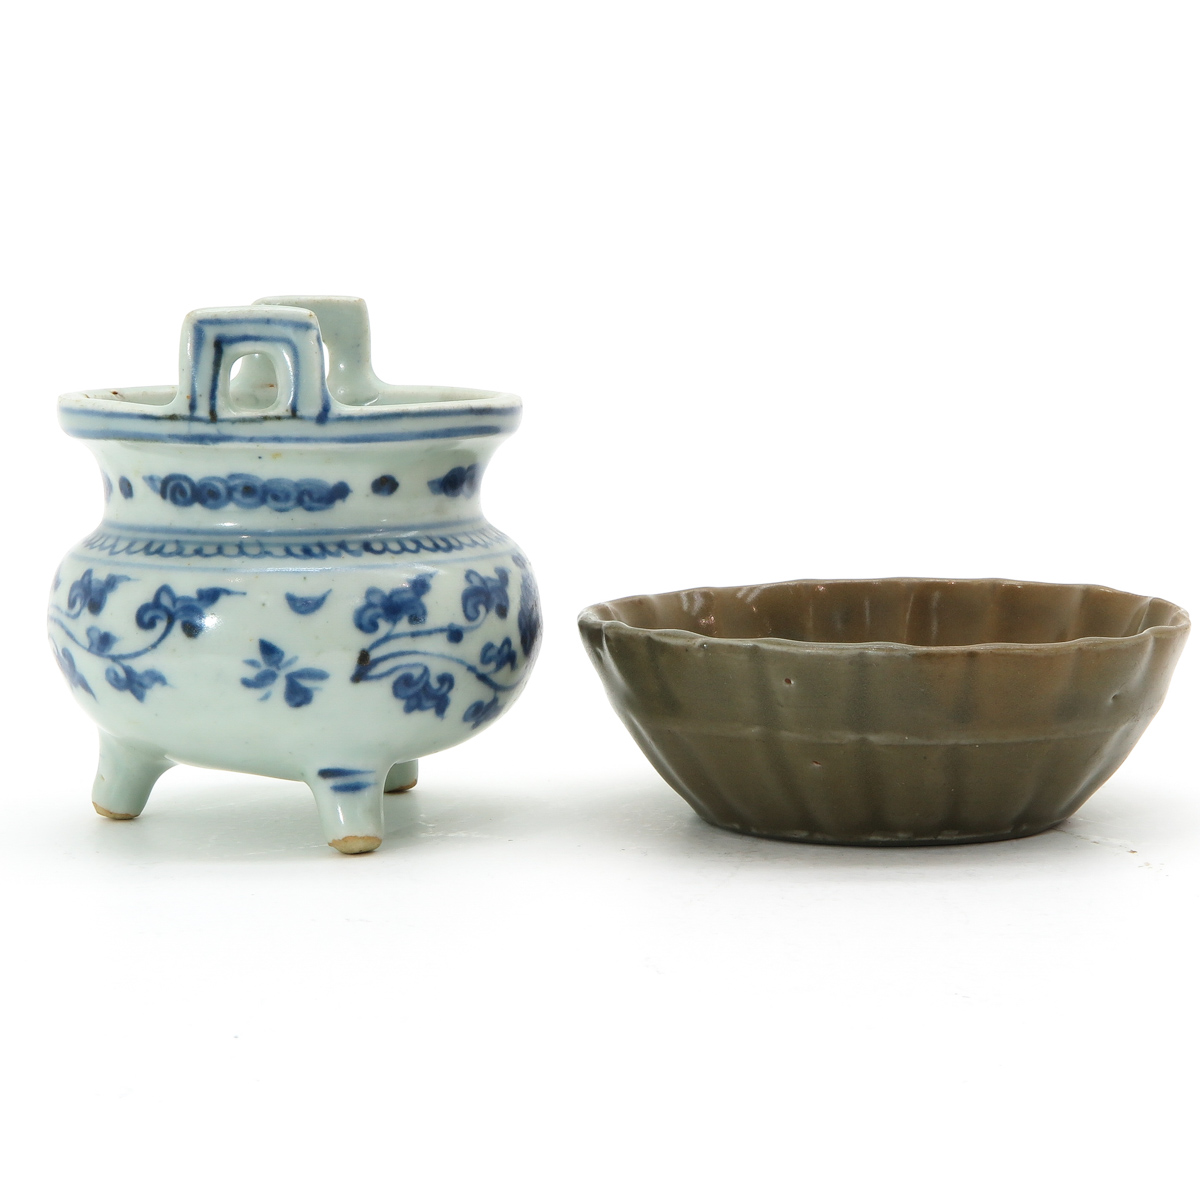 A Blue and White Decor Censer with Celadon Tray - Image 4 of 6